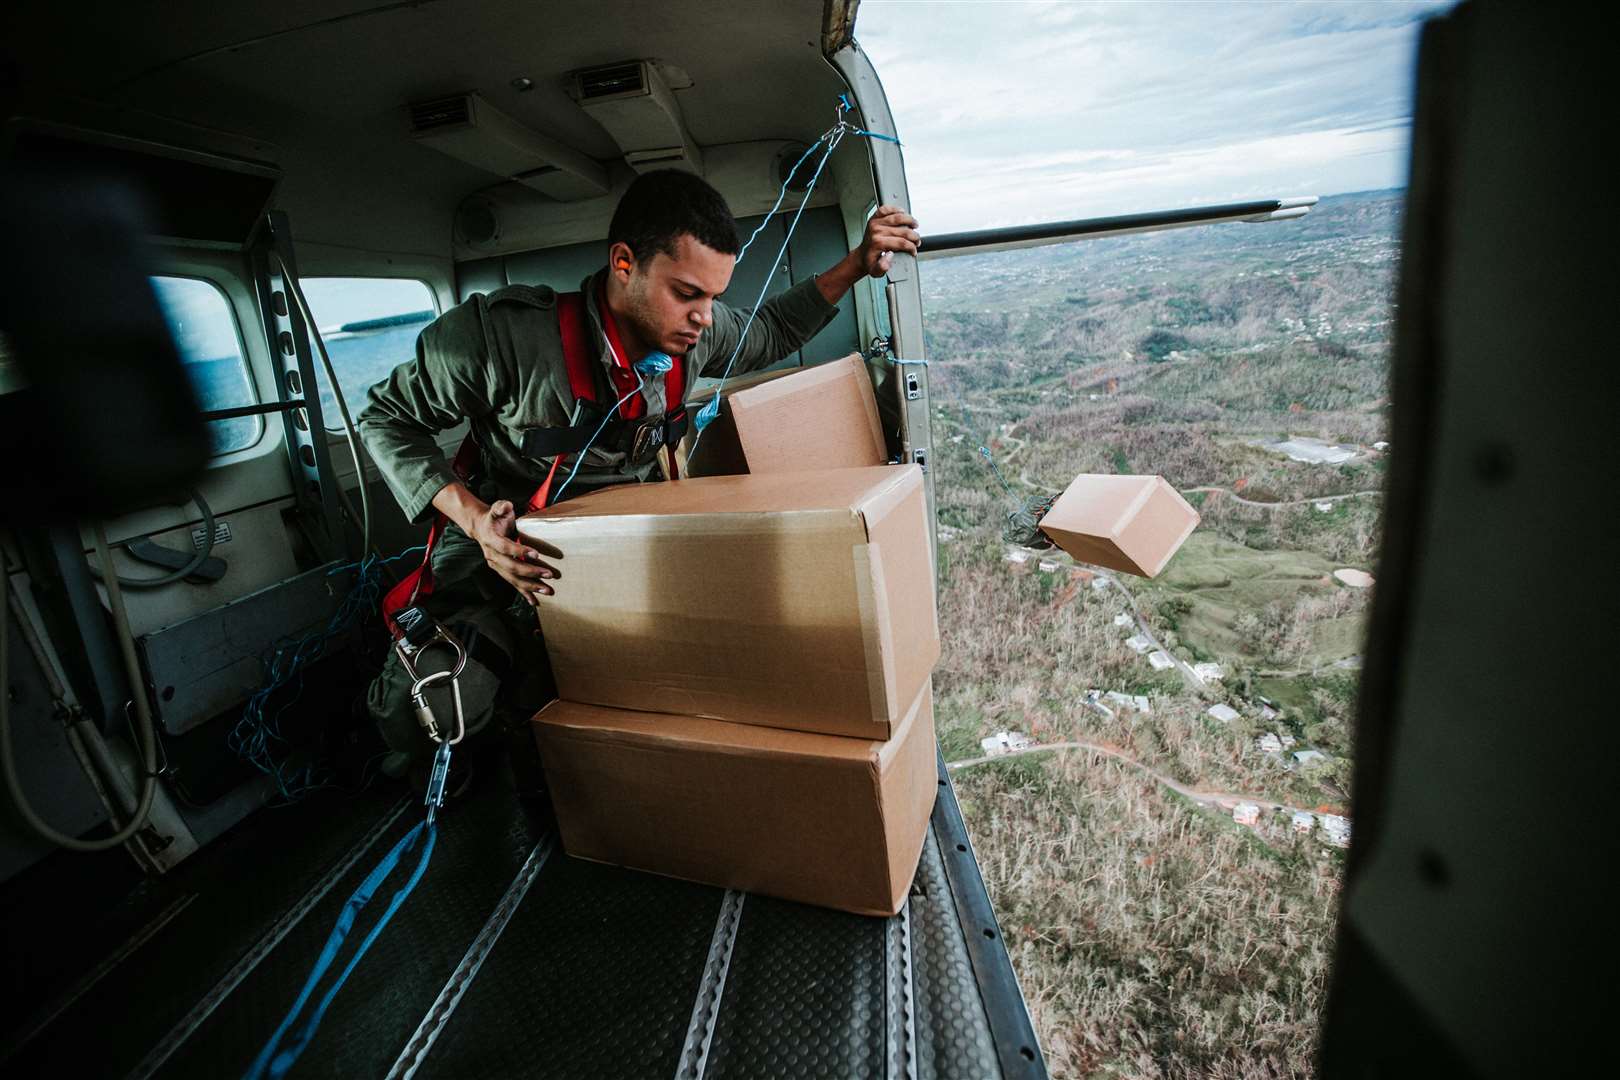 Air Drop Box systems were used in Puerto Rico in October to held with the aid effort following Hurricanes Irma and Maria